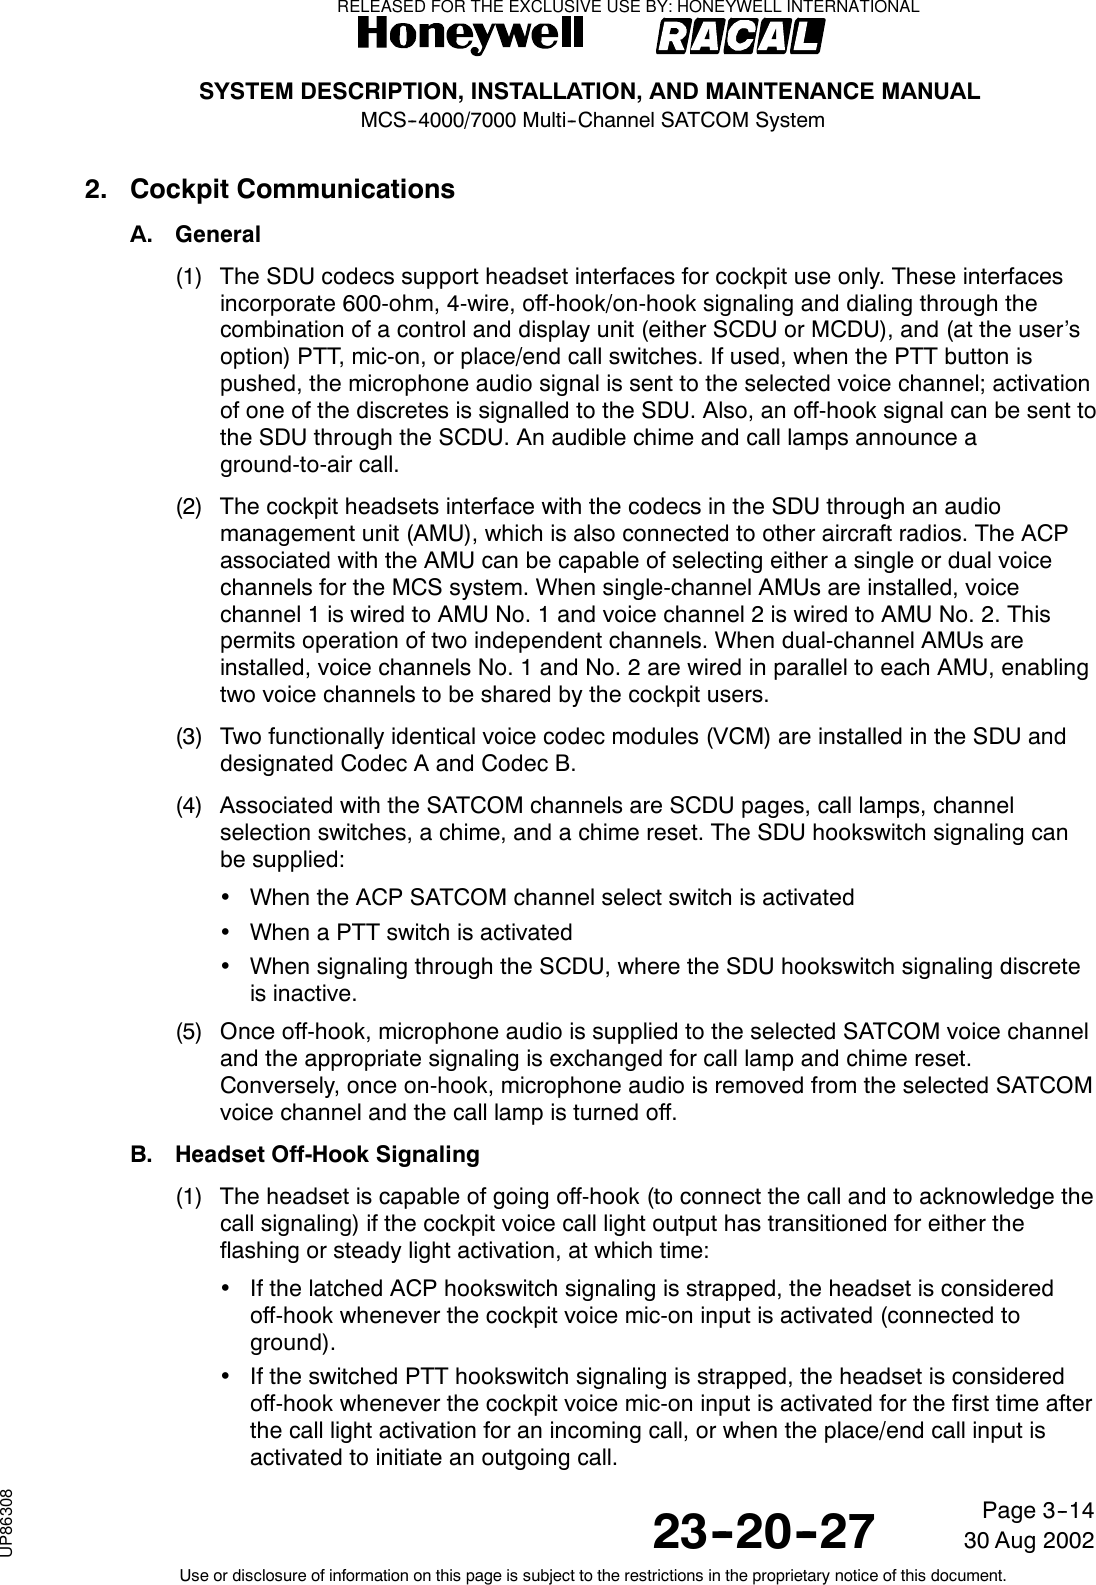 SYSTEM DESCRIPTION, INSTALLATION, AND MAINTENANCE MANUALMCS--4000/7000 Multi--Channel SATCOM System23--20--2730 Aug 2002Use or disclosure of information on this page is subject to the restrictions in the proprietary notice of this document.Page 3--142. Cockpit CommunicationsA. General(1) The SDU codecs support headset interfaces for cockpit use only. These interfacesincorporate 600-ohm, 4-wire, off-hook/on-hook signaling and dialing through thecombination of a control and display unit (either SCDU or MCDU), and (at the user’soption) PTT, mic-on, or place/end call switches. If used, when the PTT button ispushed, the microphone audio signal is sent to the selected voice channel; activationof one of the discretes is signalled to the SDU. Also, an off-hook signal can be sent tothe SDU through the SCDU. An audible chime and call lamps announce aground-to-air call.(2) The cockpit headsets interface with the codecs in the SDU through an audiomanagement unit (AMU), which is also connected to other aircraft radios. The ACPassociated with the AMU can be capable of selecting either a single or dual voicechannels for the MCS system. When single-channel AMUs are installed, voicechannel 1 is wired to AMU No. 1 and voice channel 2 is wired to AMU No. 2. Thispermits operation of two independent channels. When dual-channel AMUs areinstalled, voice channels No. 1 and No. 2 are wired in parallel to each AMU, enablingtwo voice channels to be shared by the cockpit users.(3) Two functionally identical voice codec modules (VCM) are installed in the SDU anddesignated Codec A and Codec B.(4) Associated with the SATCOM channels are SCDU pages, call lamps, channelselection switches, a chime, and a chime reset. The SDU hookswitch signaling canbe supplied:•When the ACP SATCOM channel select switch is activated•When a PTT switch is activated•When signaling through the SCDU, where the SDU hookswitch signaling discreteis inactive.(5) Once off-hook, microphone audio is supplied to the selected SATCOM voice channeland the appropriate signaling is exchanged for call lamp and chime reset.Conversely, once on-hook, microphone audio is removed from the selected SATCOMvoice channel and the call lamp is turned off.B. Headset Off-Hook Signaling(1) The headset is capable of going off-hook (to connect the call and to acknowledge thecall signaling) if the cockpit voice call light output has transitioned for either theflashing or steady light activation, at which time:•If the latched ACP hookswitch signaling is strapped, the headset is consideredoff-hook whenever the cockpit voice mic-on input is activated (connected toground).•If the switched PTT hookswitch signaling is strapped, the headset is consideredoff-hook whenever the cockpit voice mic-on input is activated for the first time afterthe call light activation for an incoming call, or when the place/end call input isactivated to initiate an outgoing call.RELEASED FOR THE EXCLUSIVE USE BY: HONEYWELL INTERNATIONALUP86308